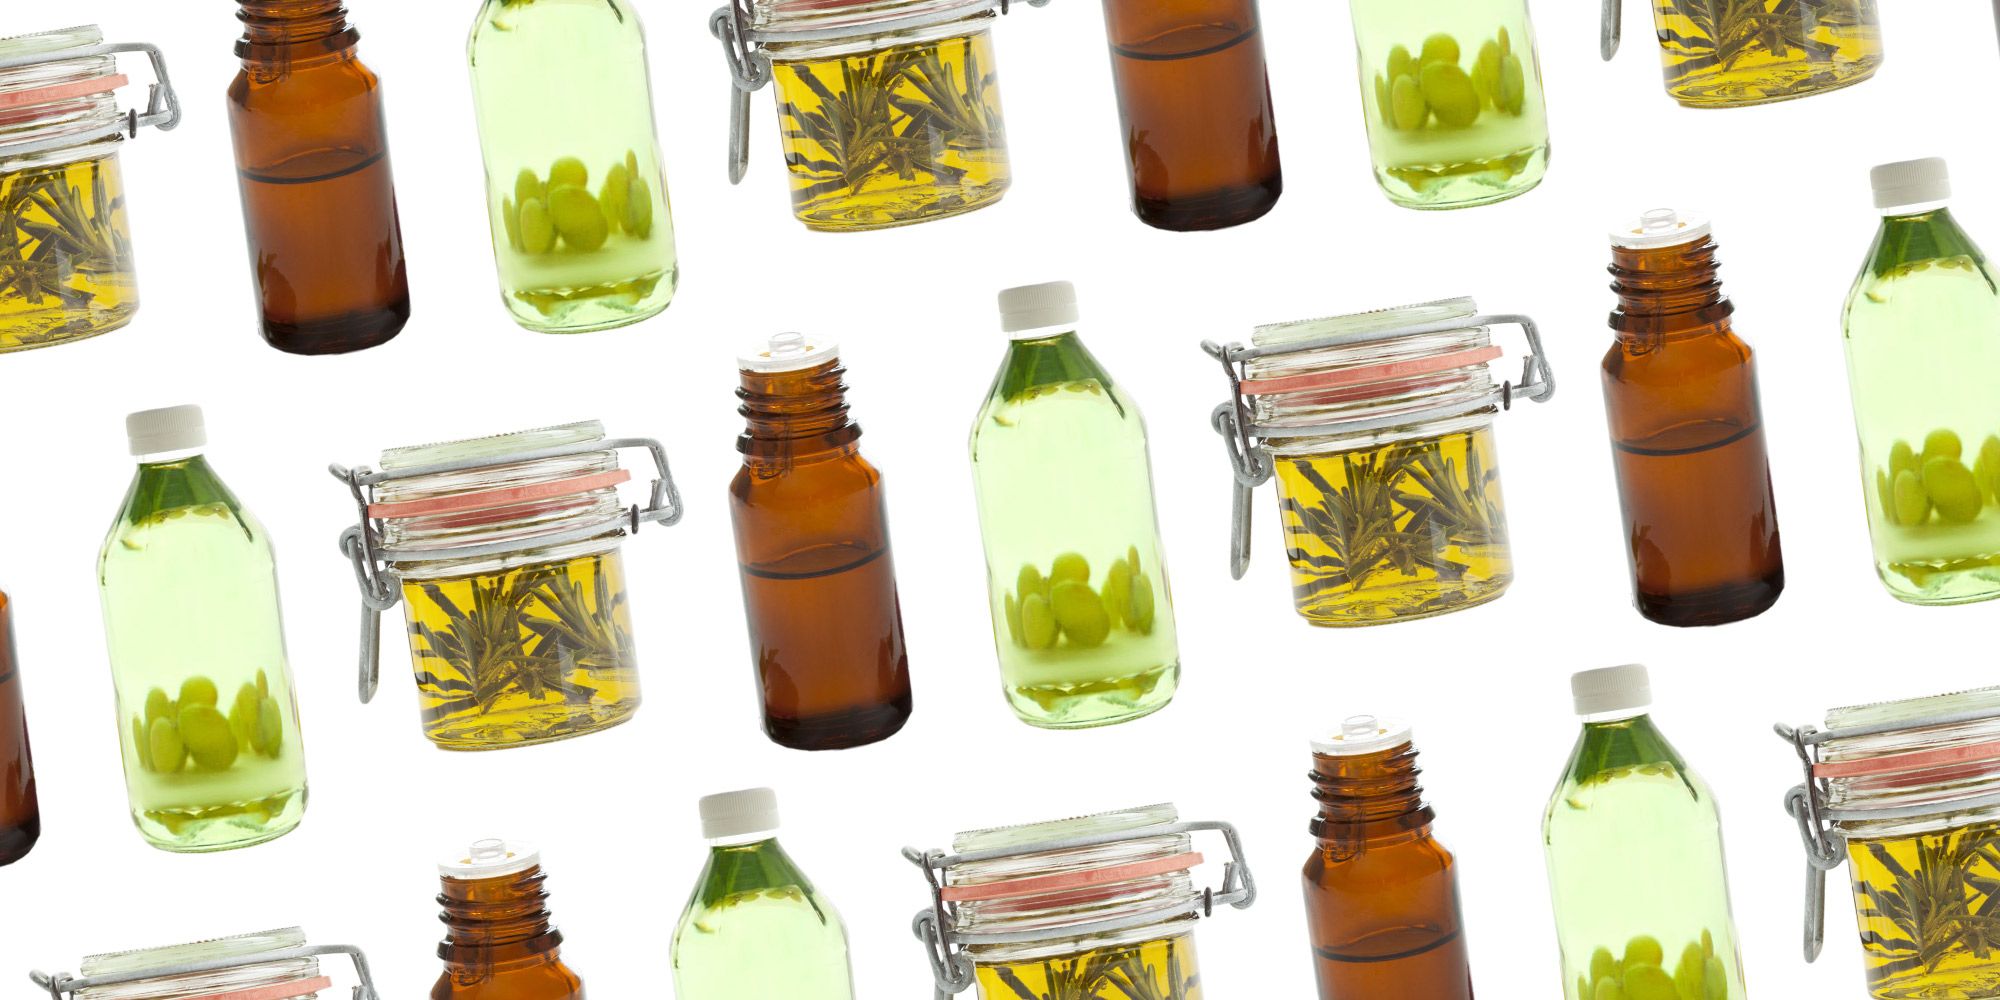 25 Best Essential Oils for Skin - Top Skincare Oils for Face and Body